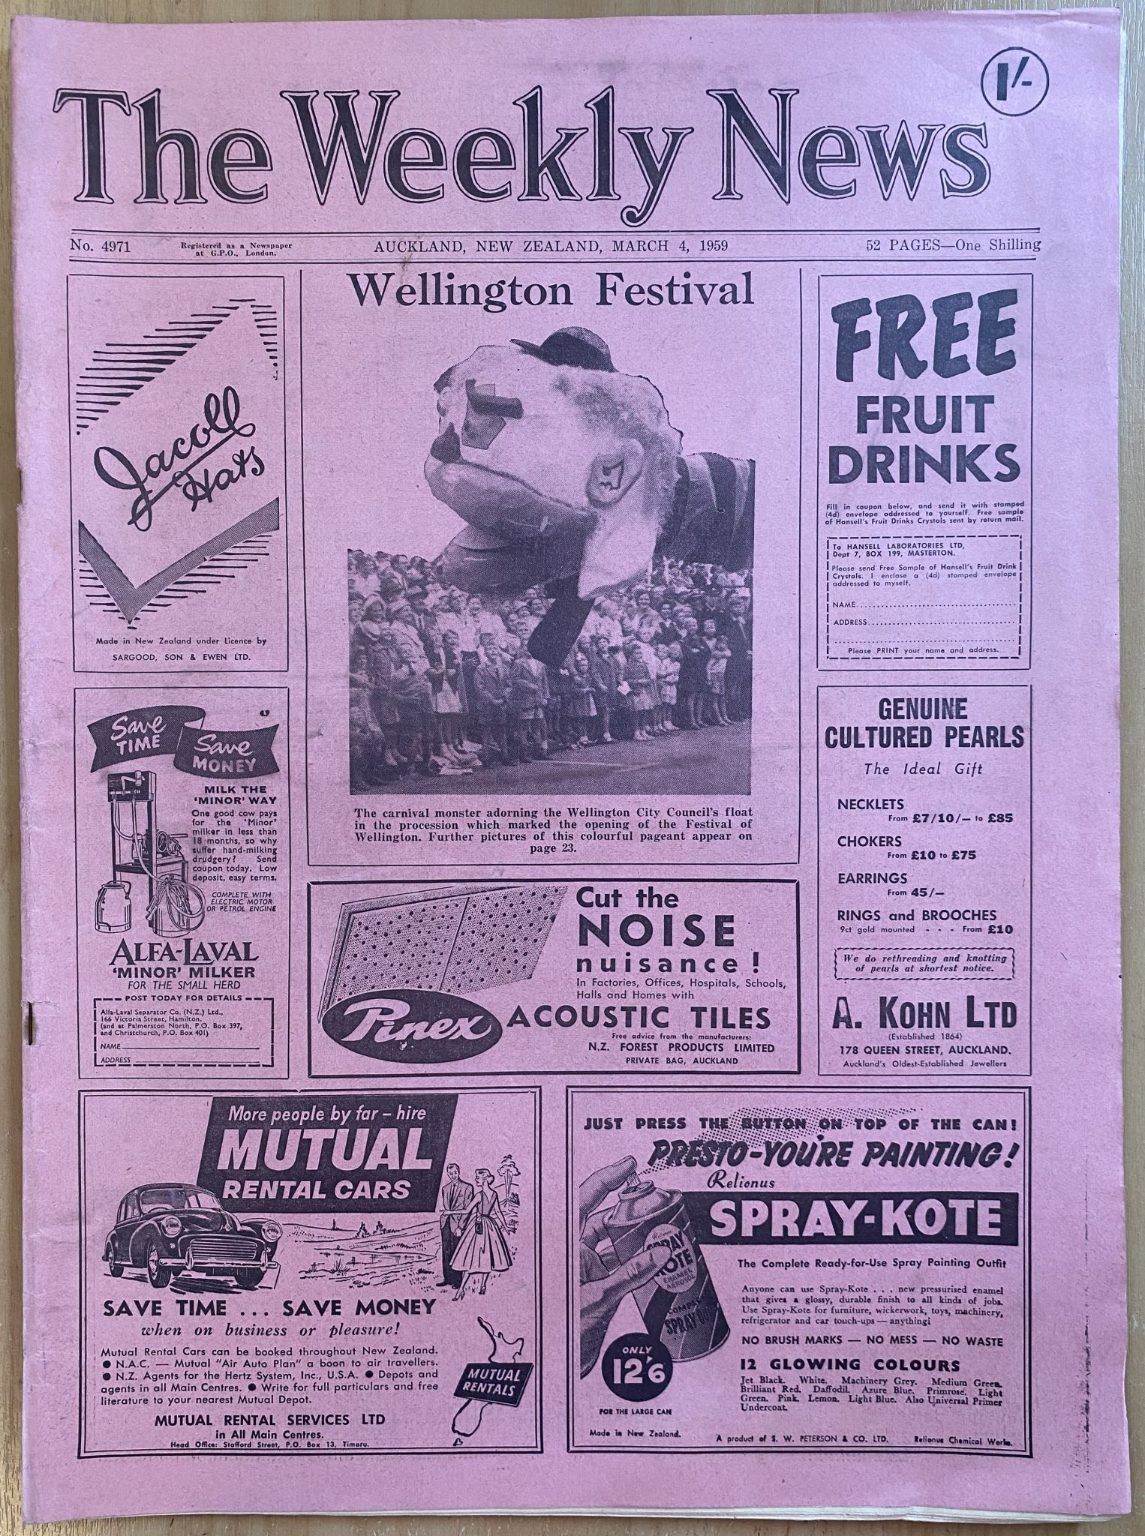 OLD NEWSPAPER: The Weekly News - No. 4971, 4 March 1959